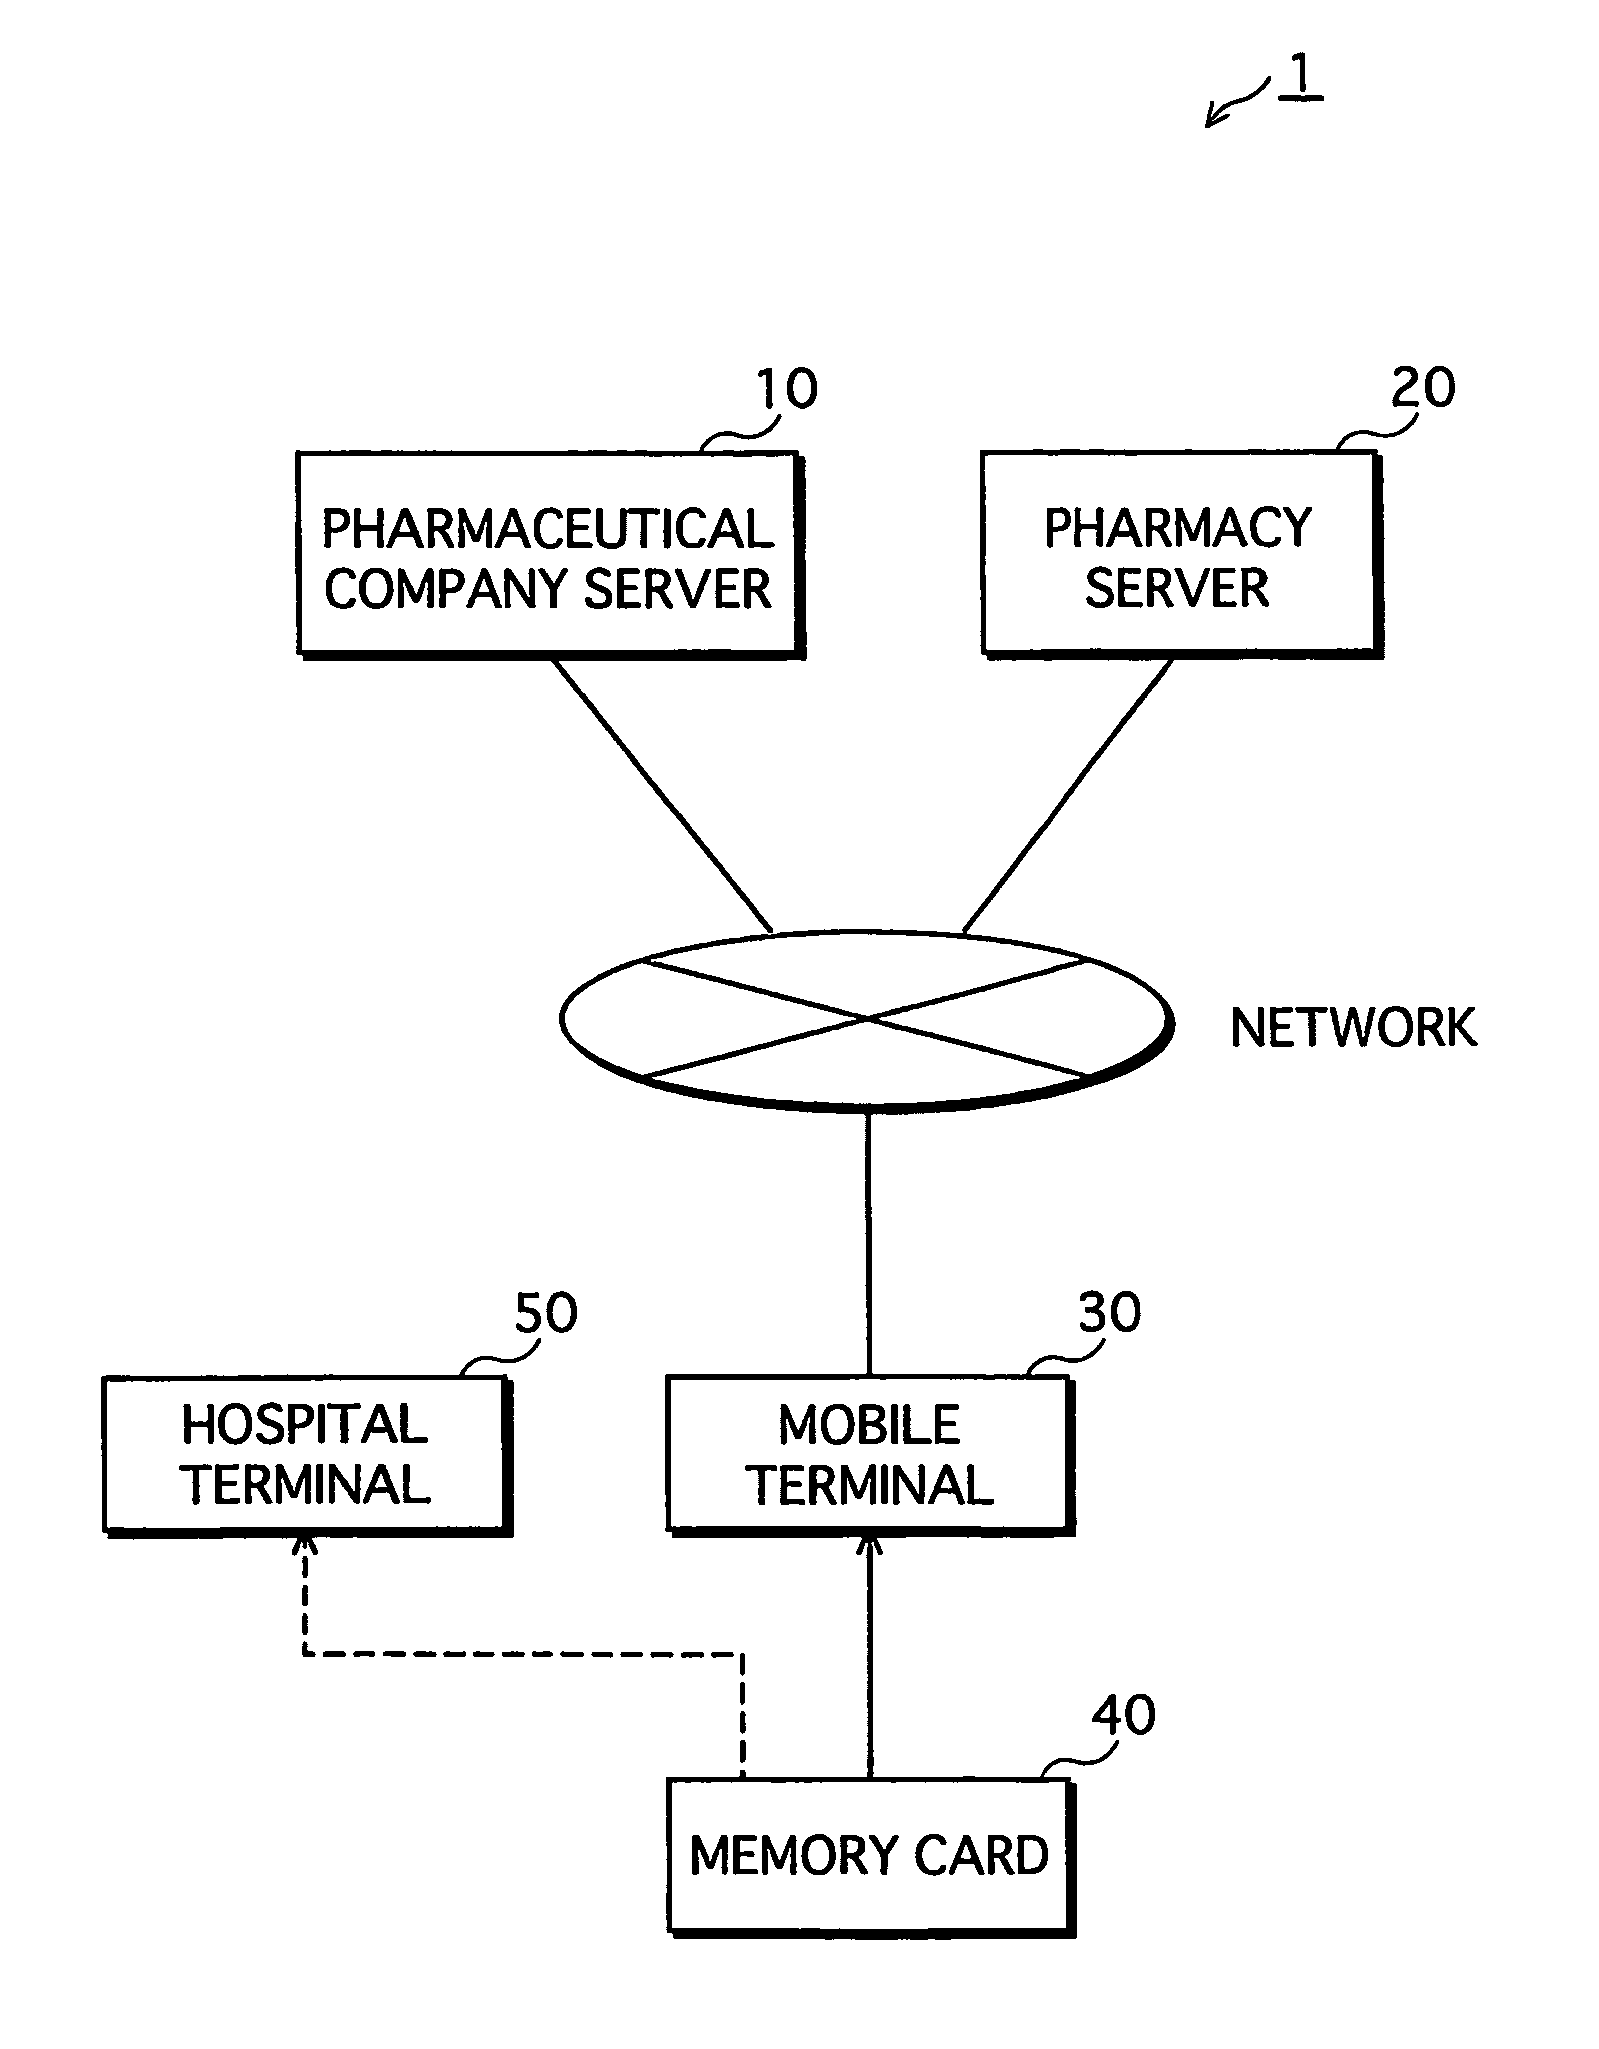 Mobile medication history management apparatus, memory card, and management method